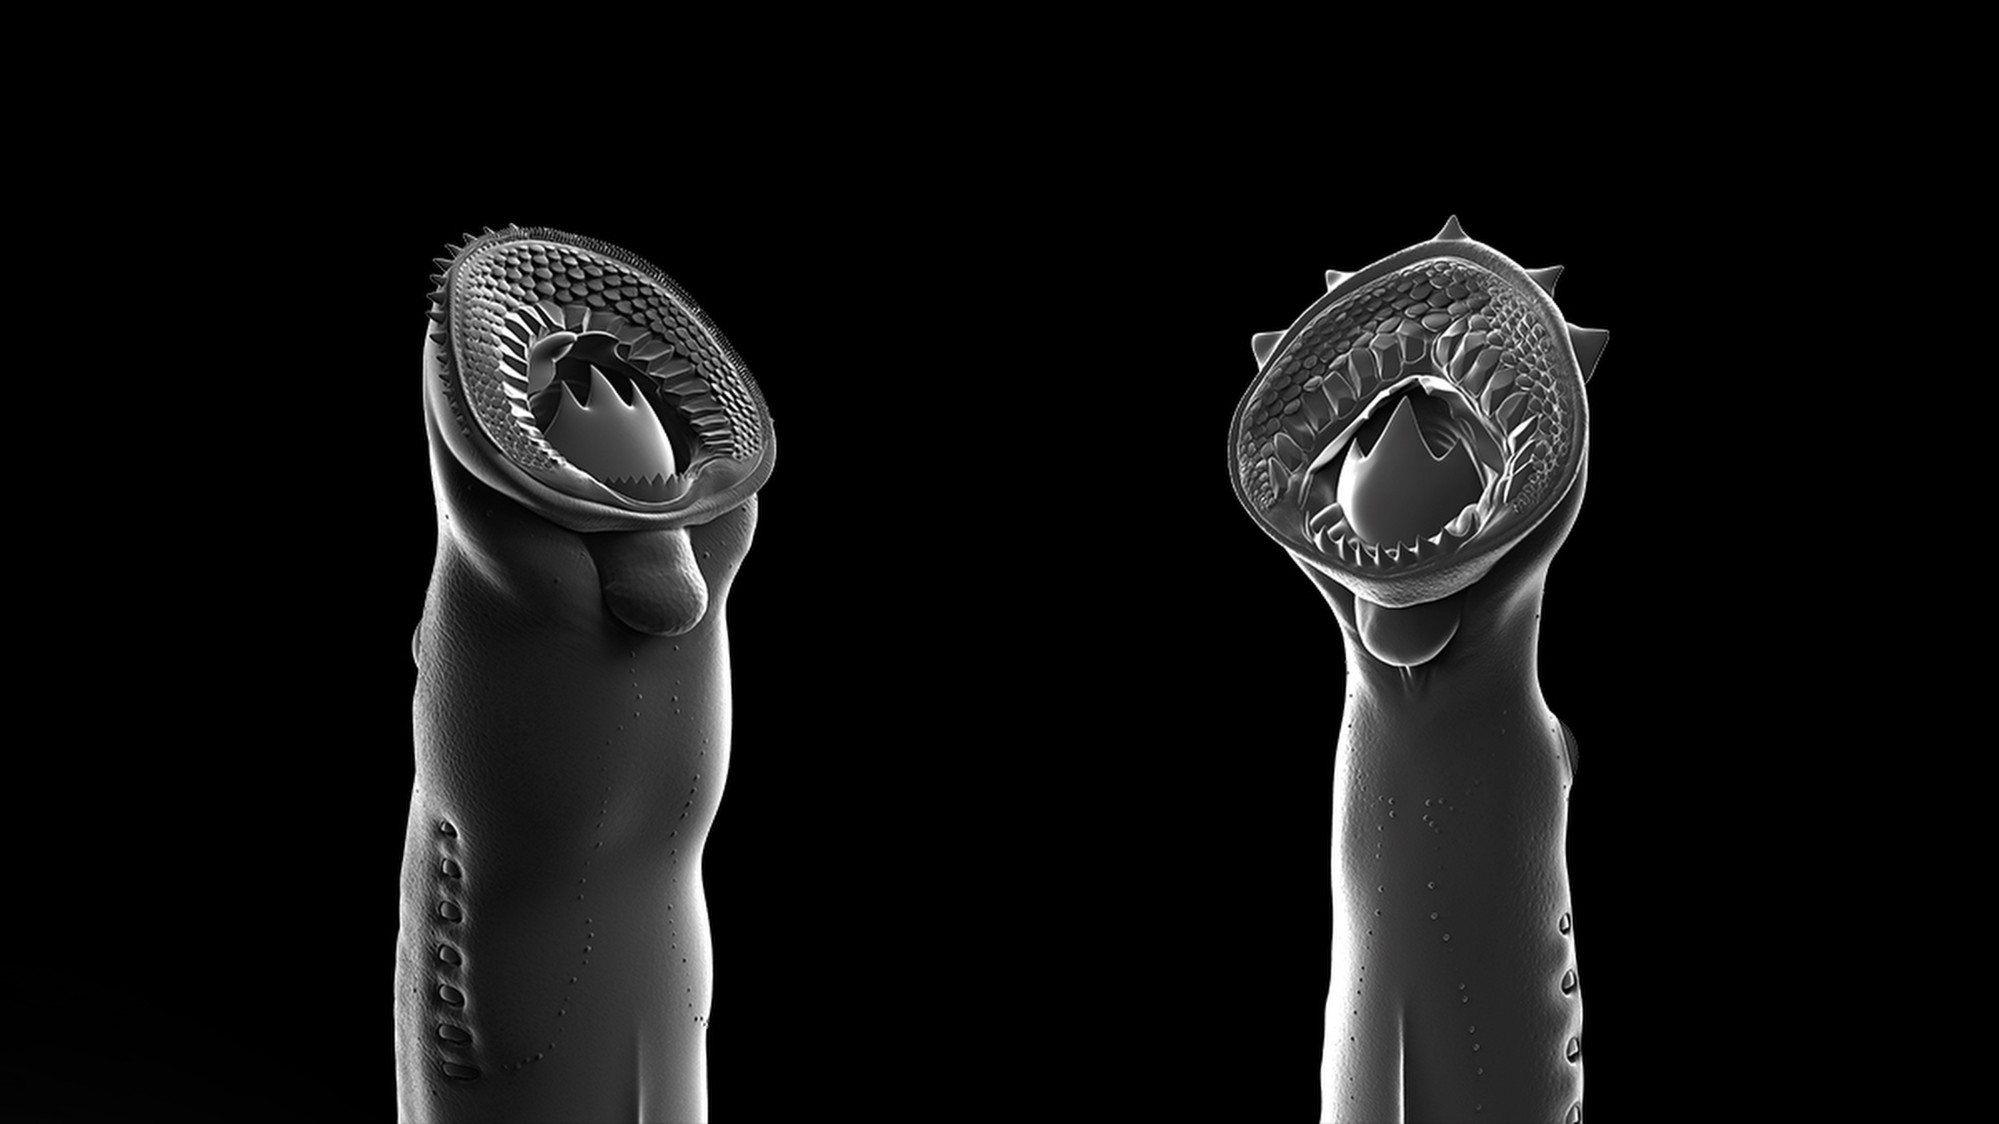 These Jurassic lampreys have the most powerful ‘biting structures’ among known fossil lampreys and suggest an ancestral flesh-eating habit of living lampreys. Credit: NICE Vistudio